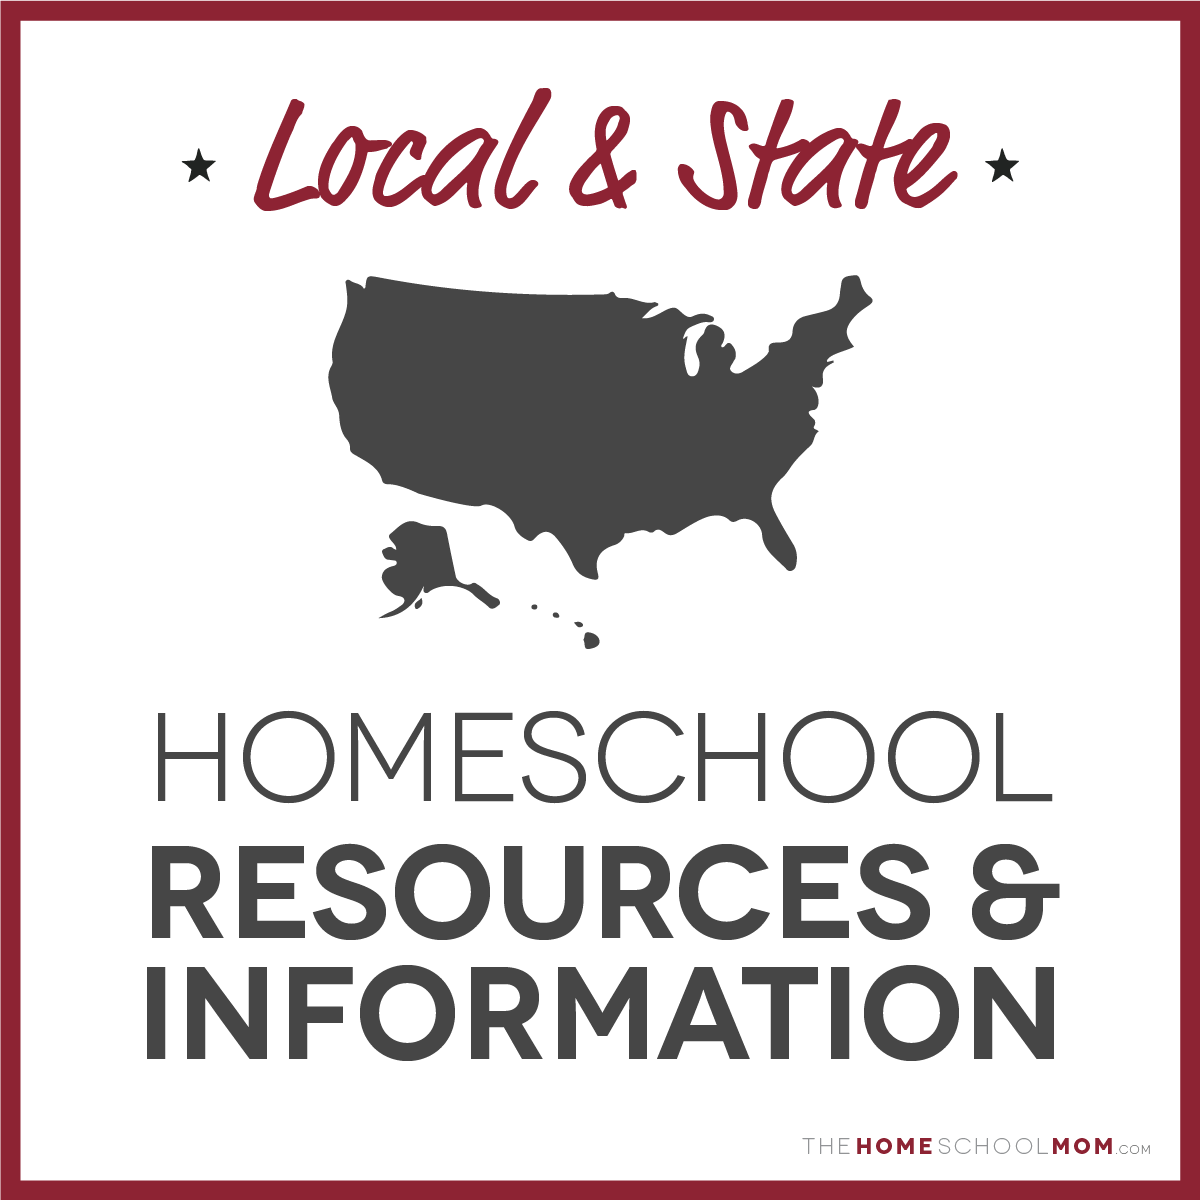 Map of united states with text Local & State Homeschool Resources & Information - TheHomeSchoolMom